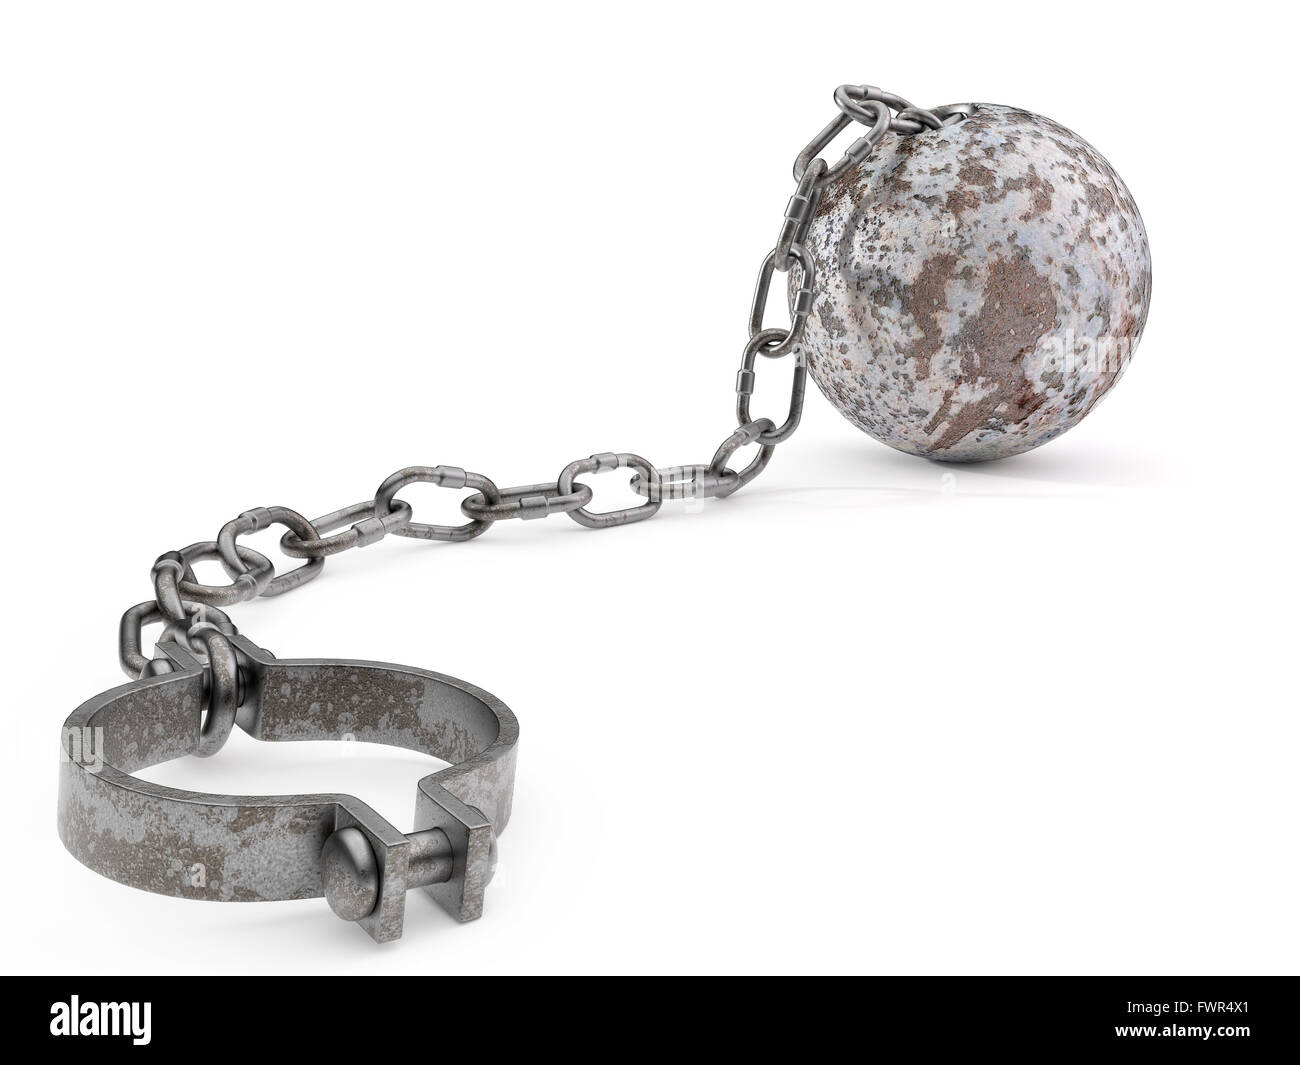 Rusty ball and chain isolated on a white background. Stock Photo